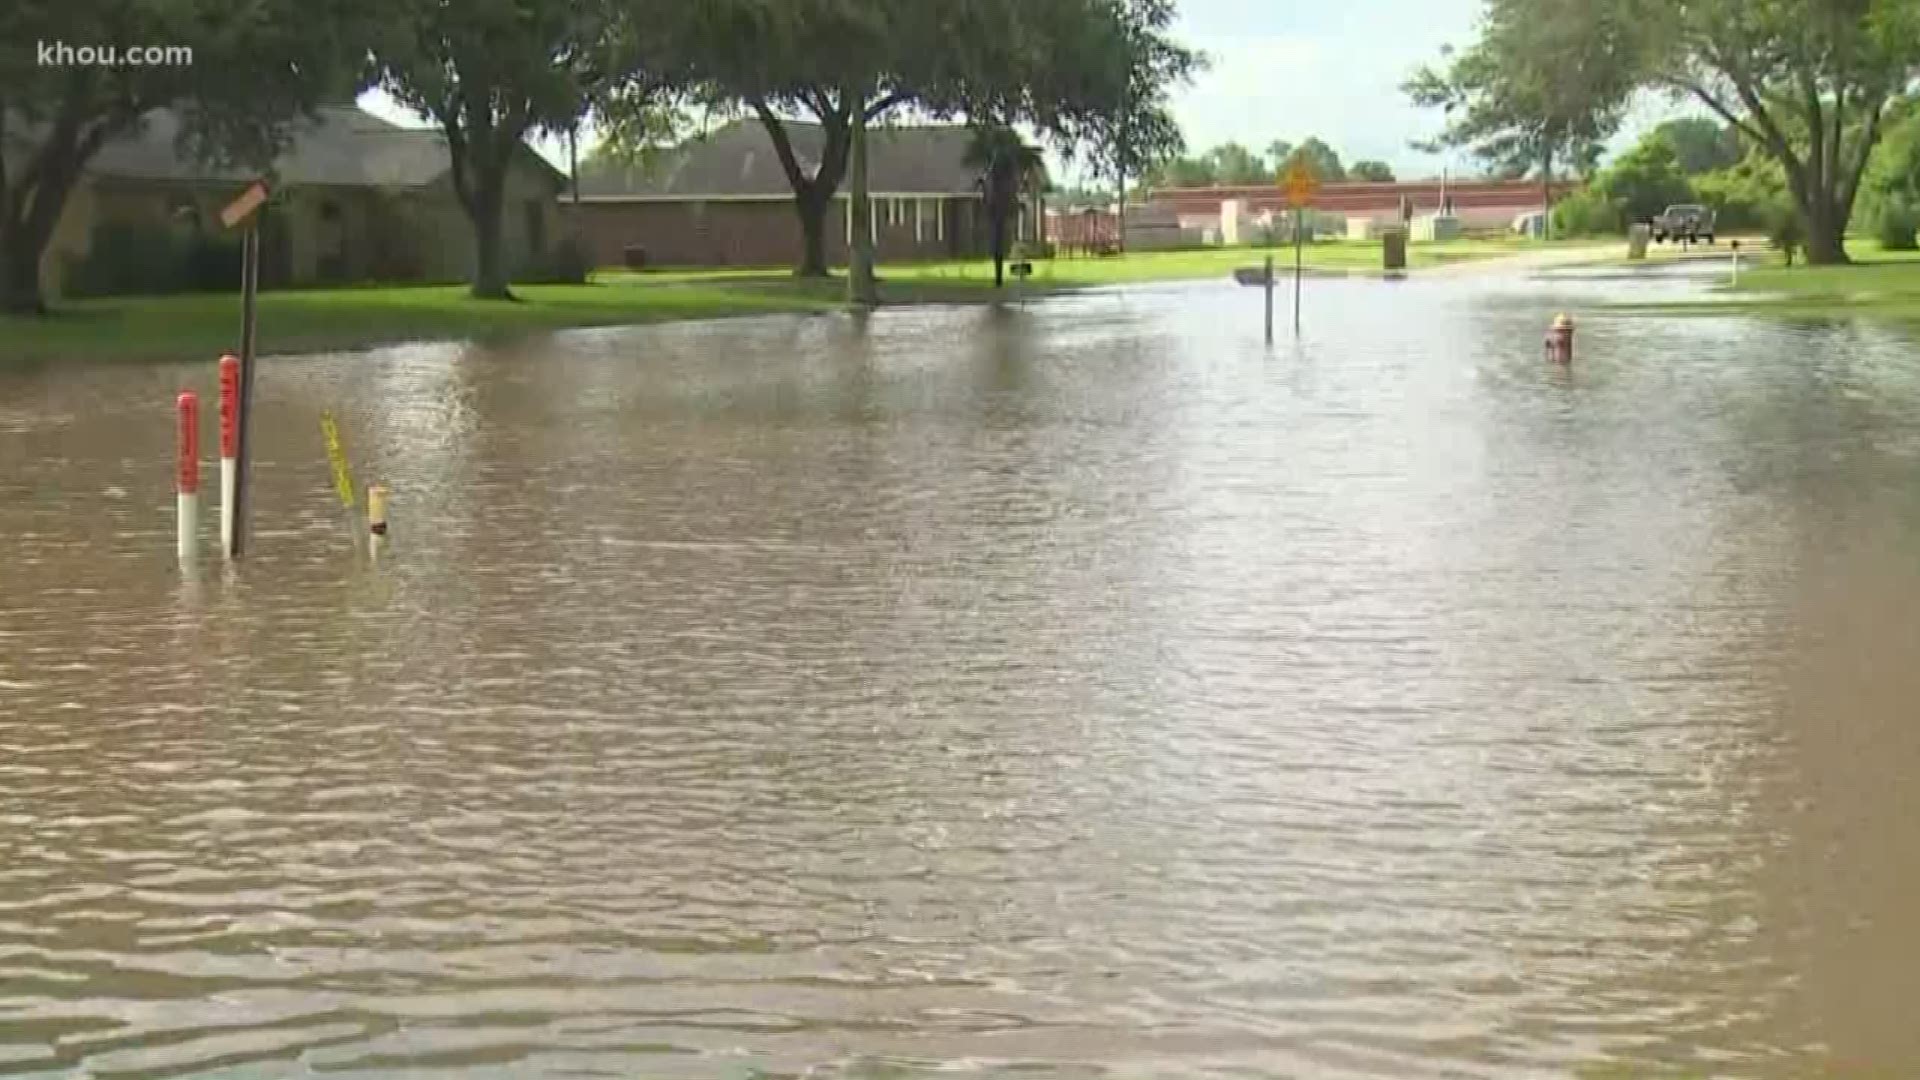 The City of Wharton’s sewage system is no longer overwhelmed after it was waterlogged as a result of heavy rain Wednesday.